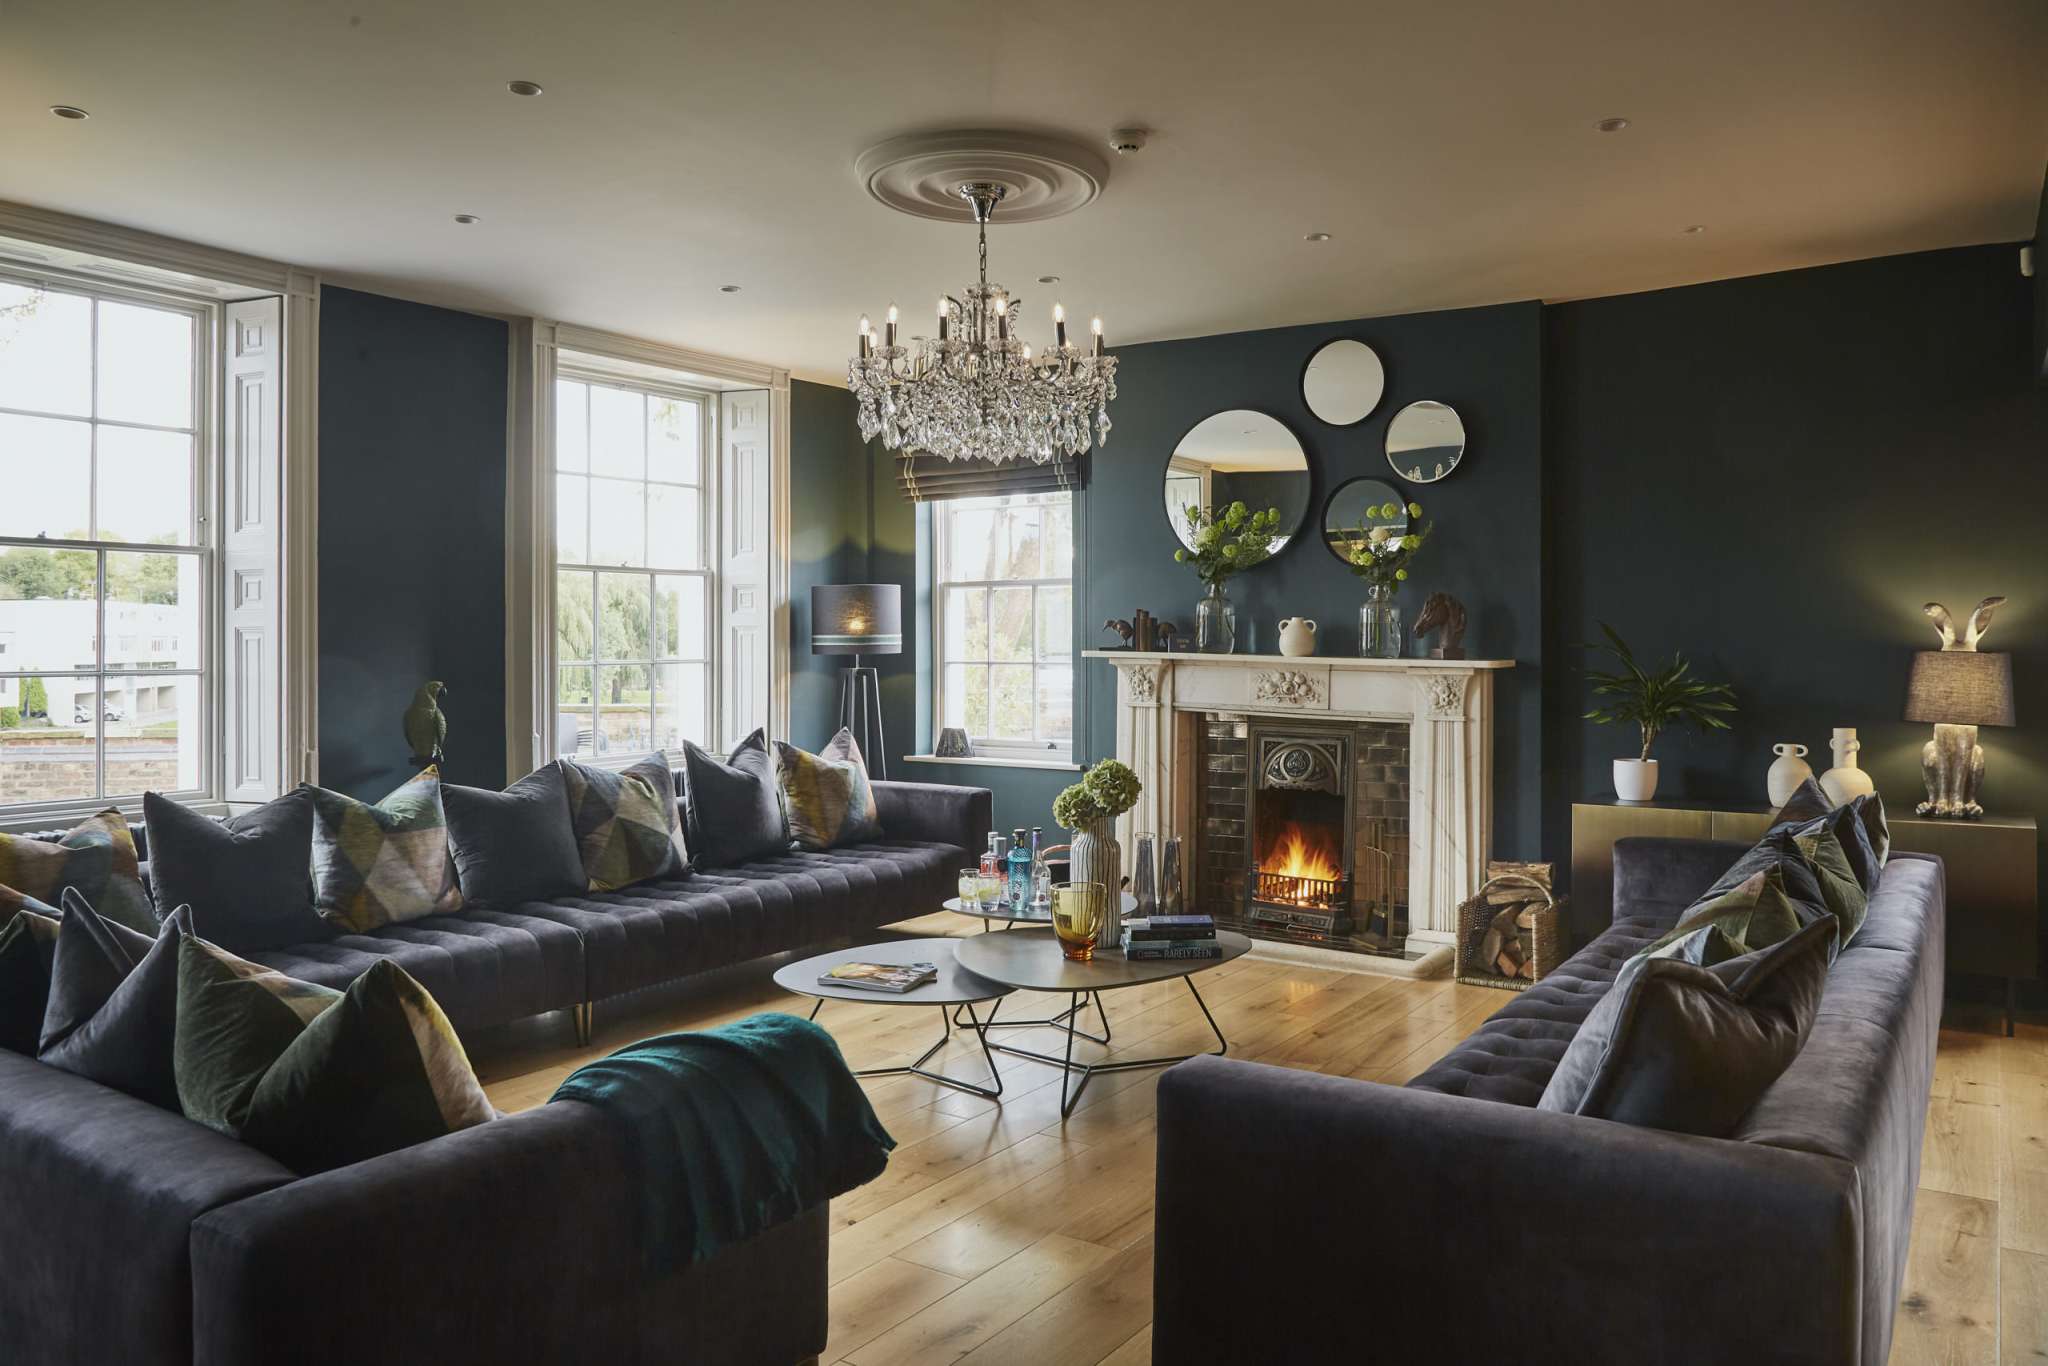 A fully refurbished Edgar House in the heart of Chester living room.